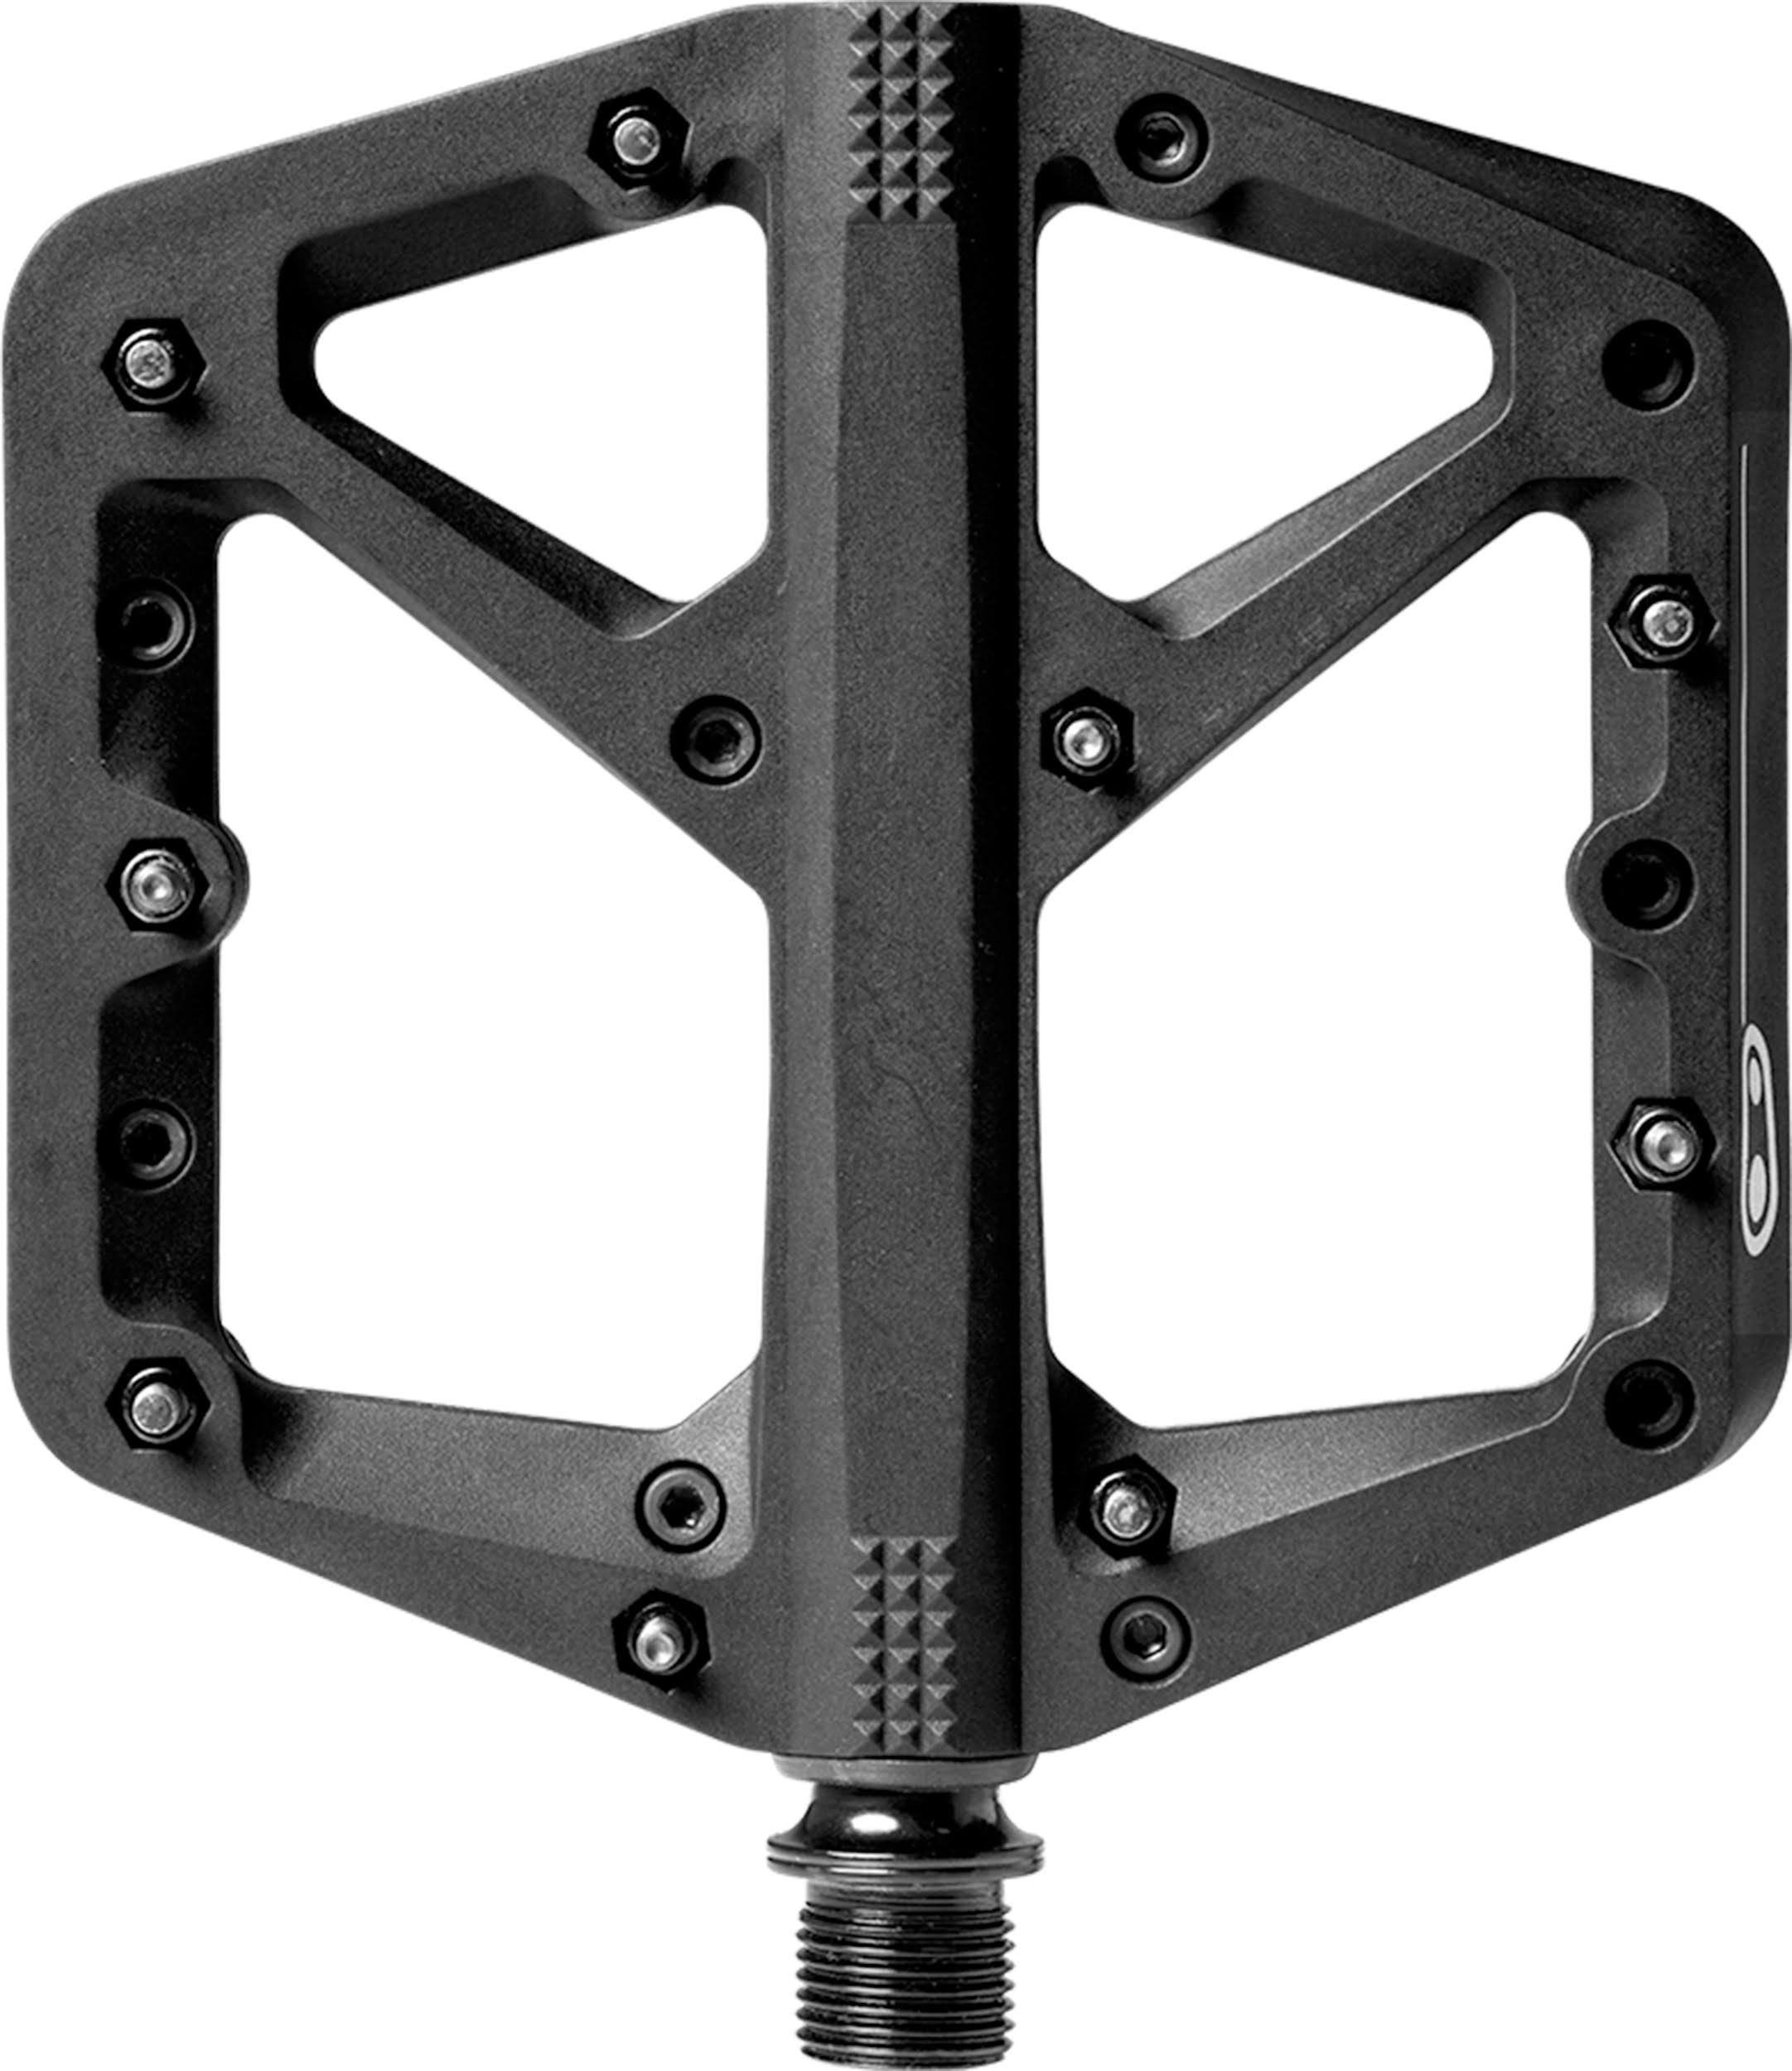 Crank Brothers Stamp 1 Pedals - Black, Small